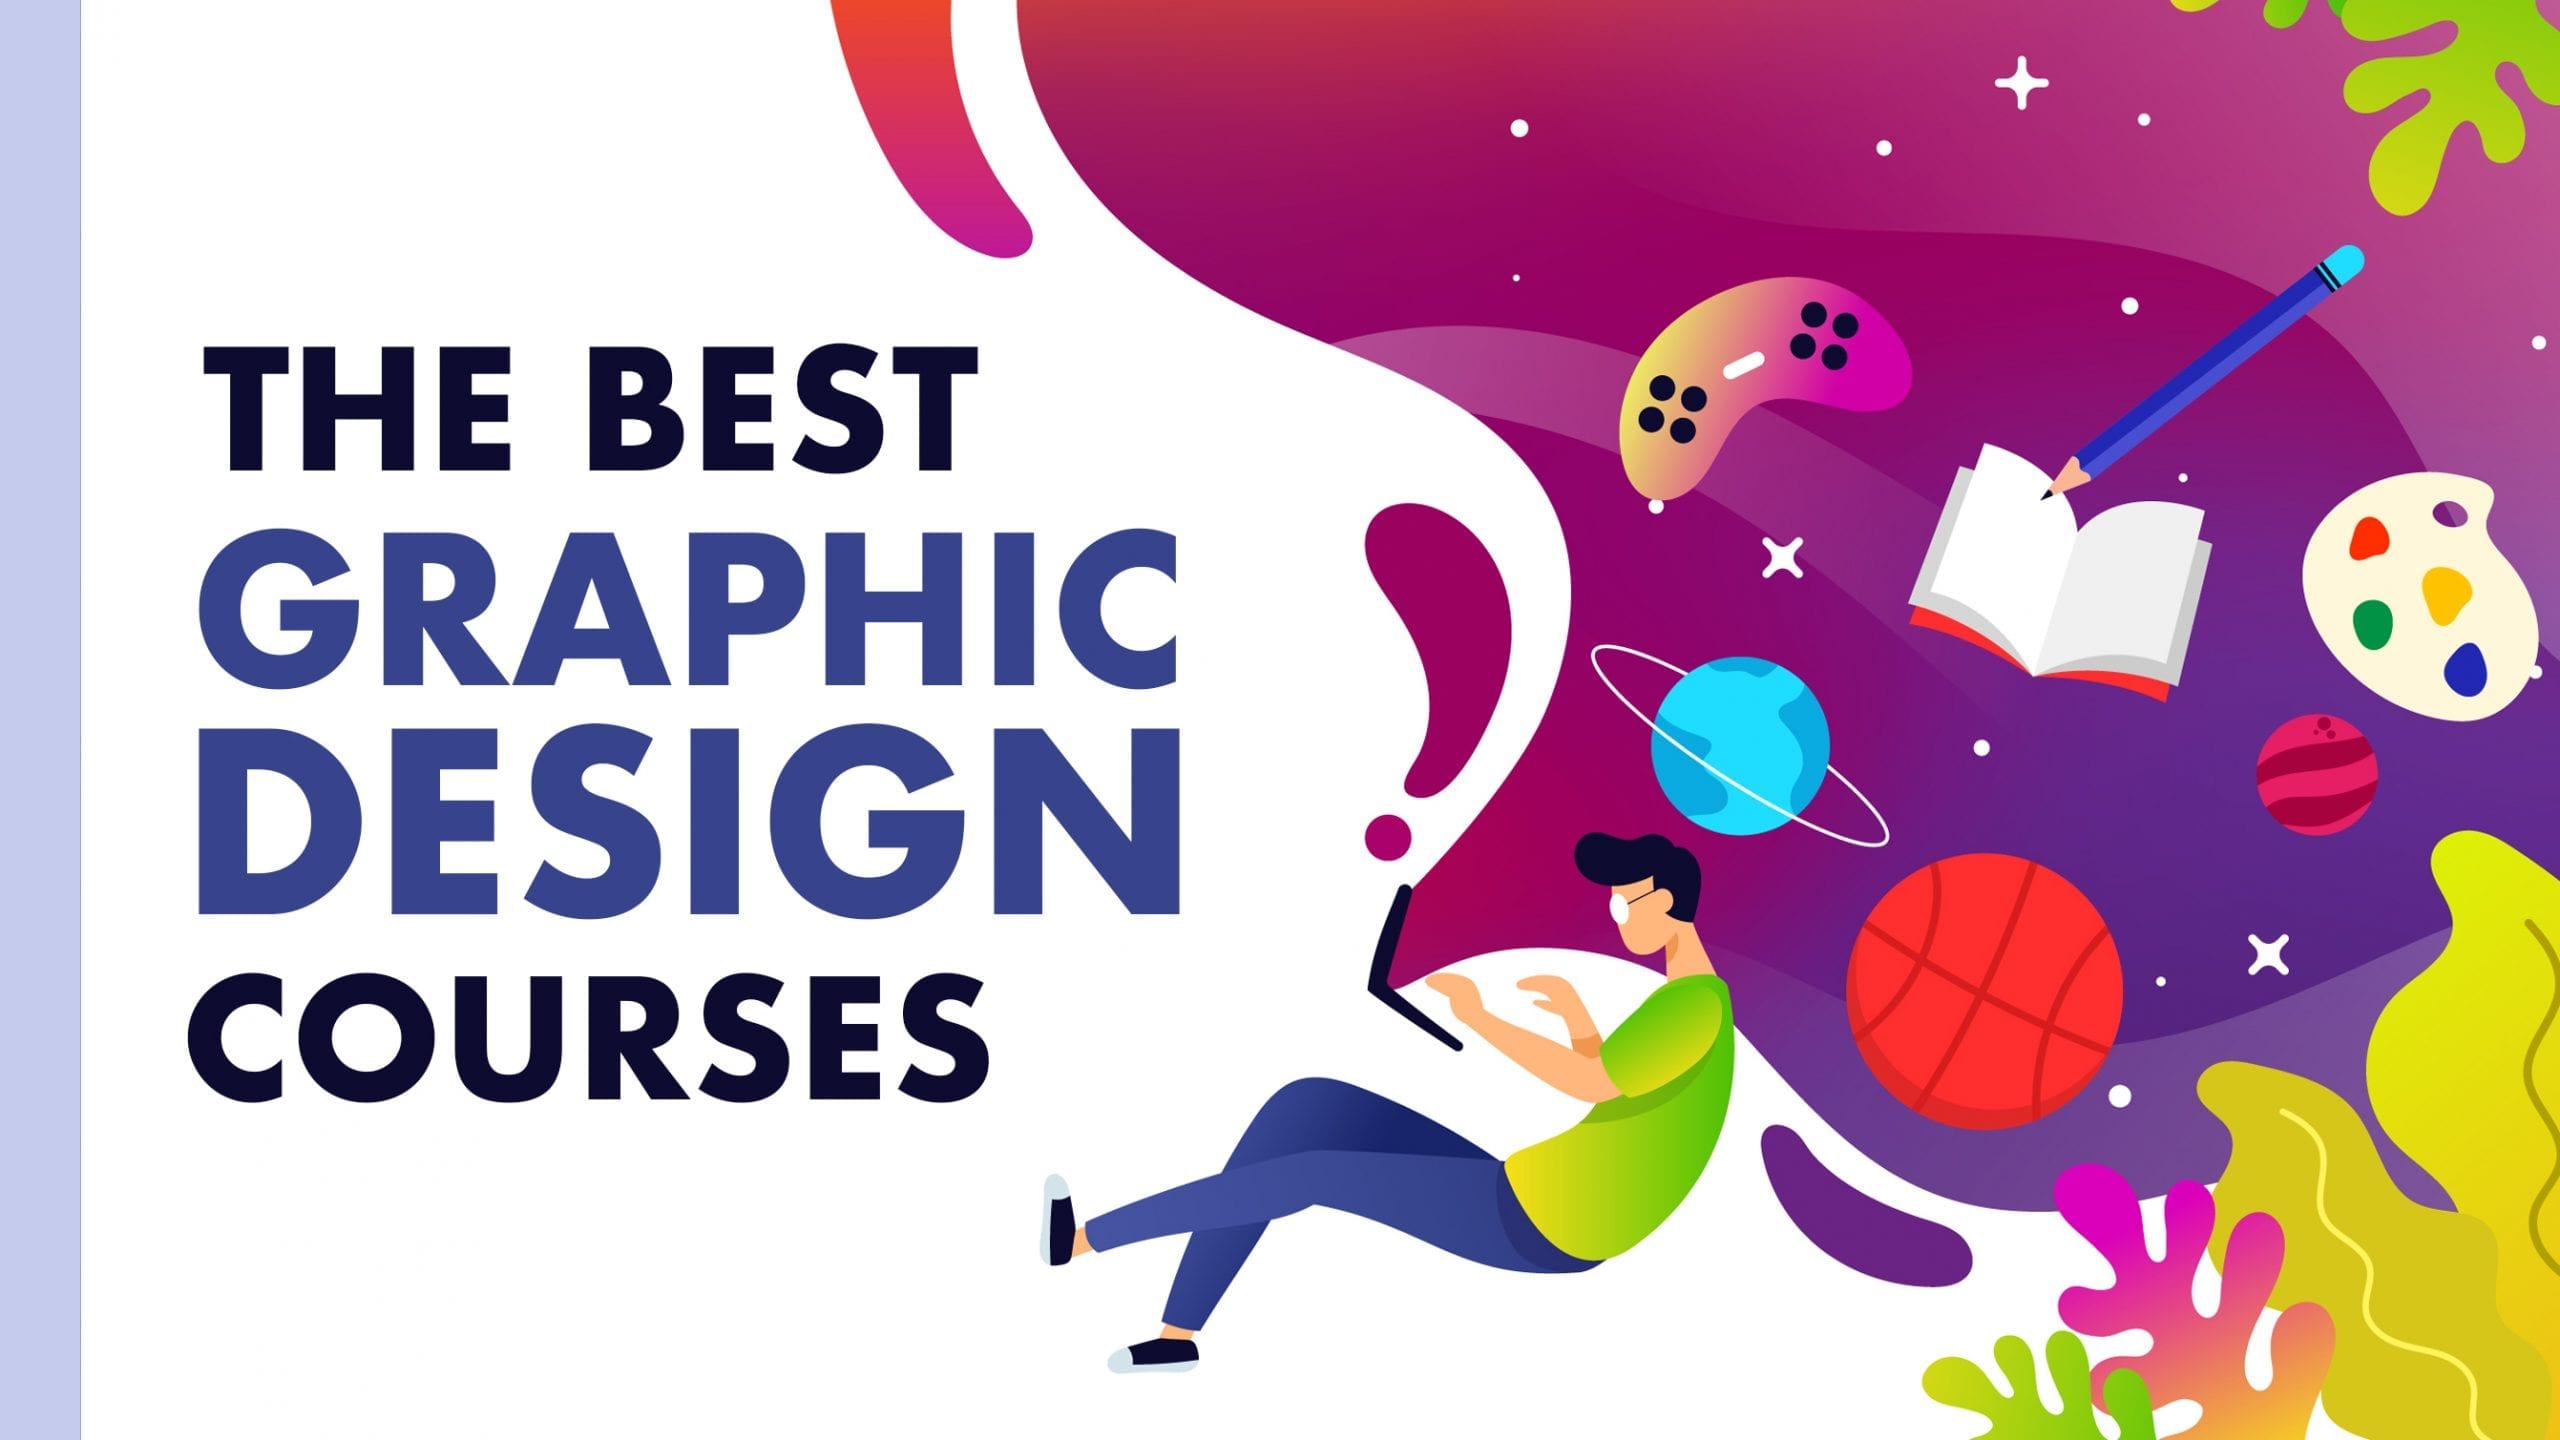 5 Best Graphic Design Courses & Classes (with Certificate